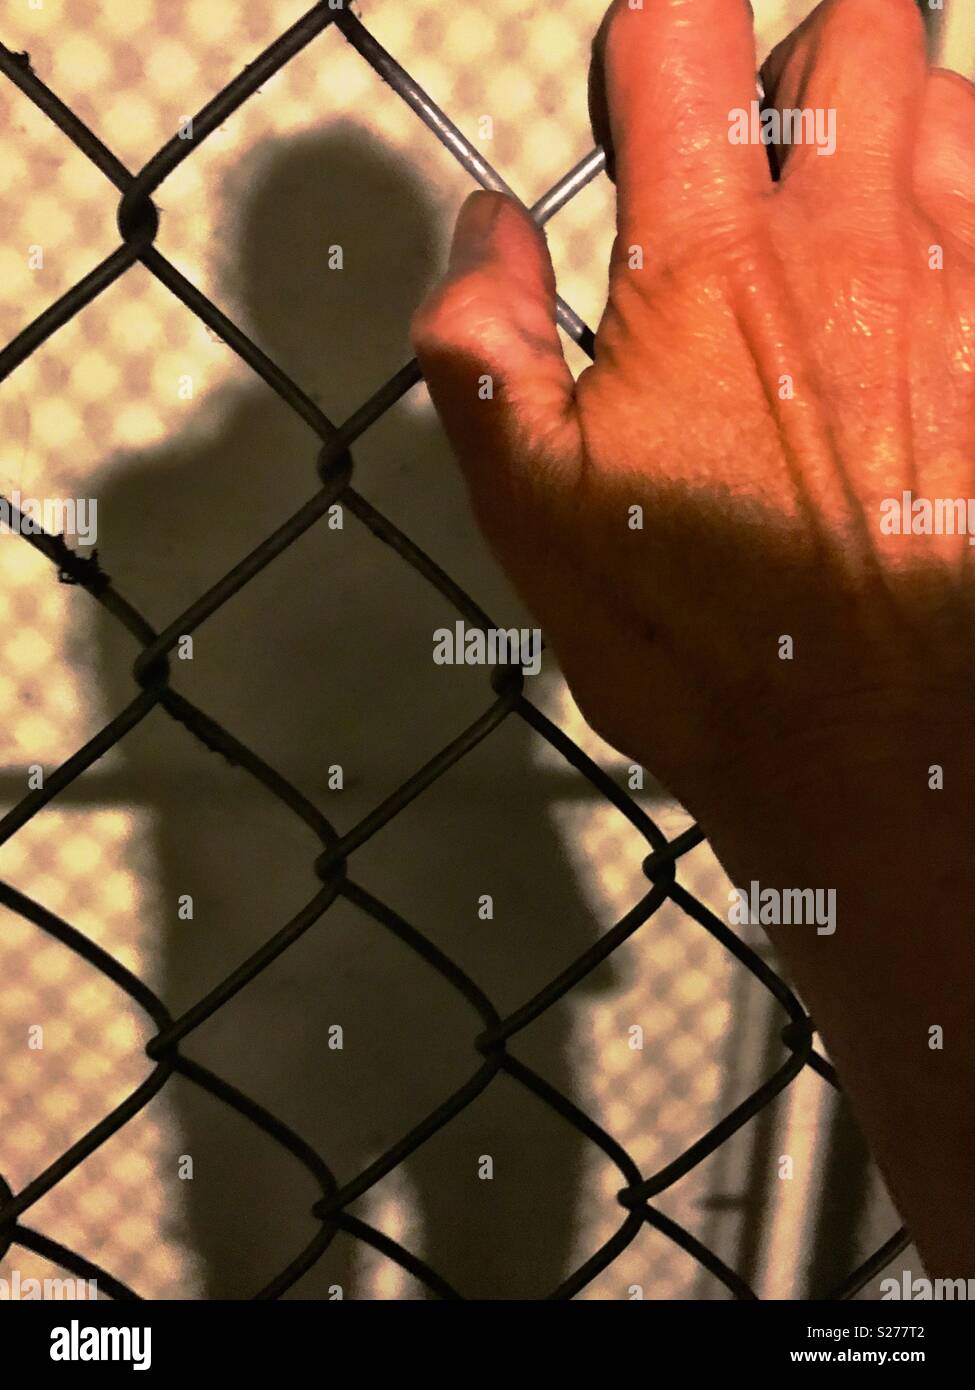 Man’s hand and shadow, with chain link fence Stock Photo